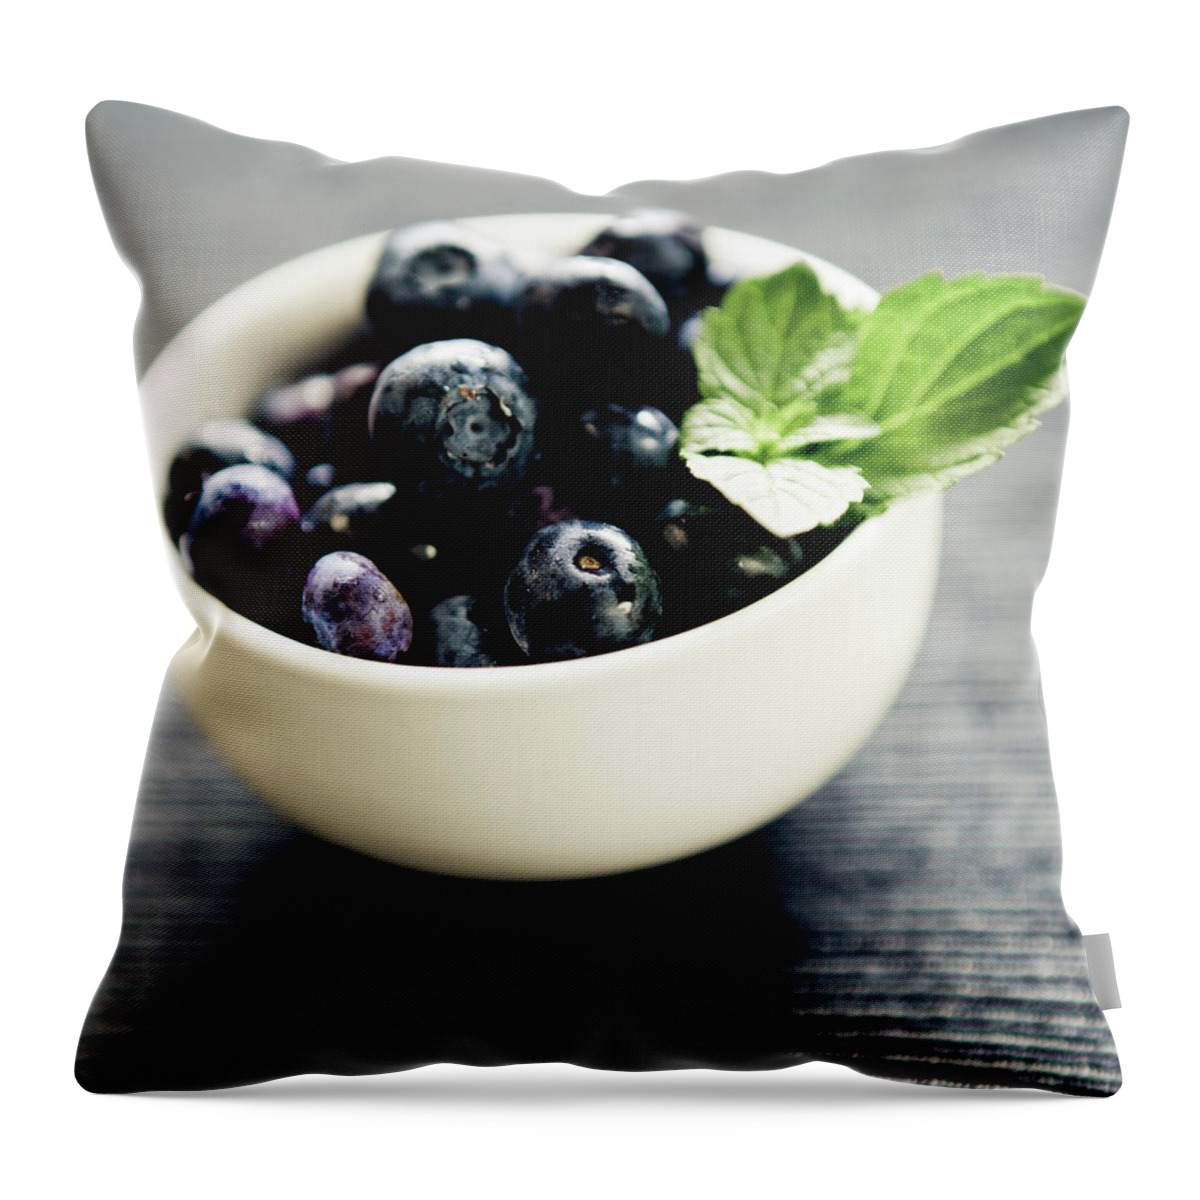 Large Group Of Objects Throw Pillow featuring the photograph Blueberries And Fresh Mint by Mmeemil